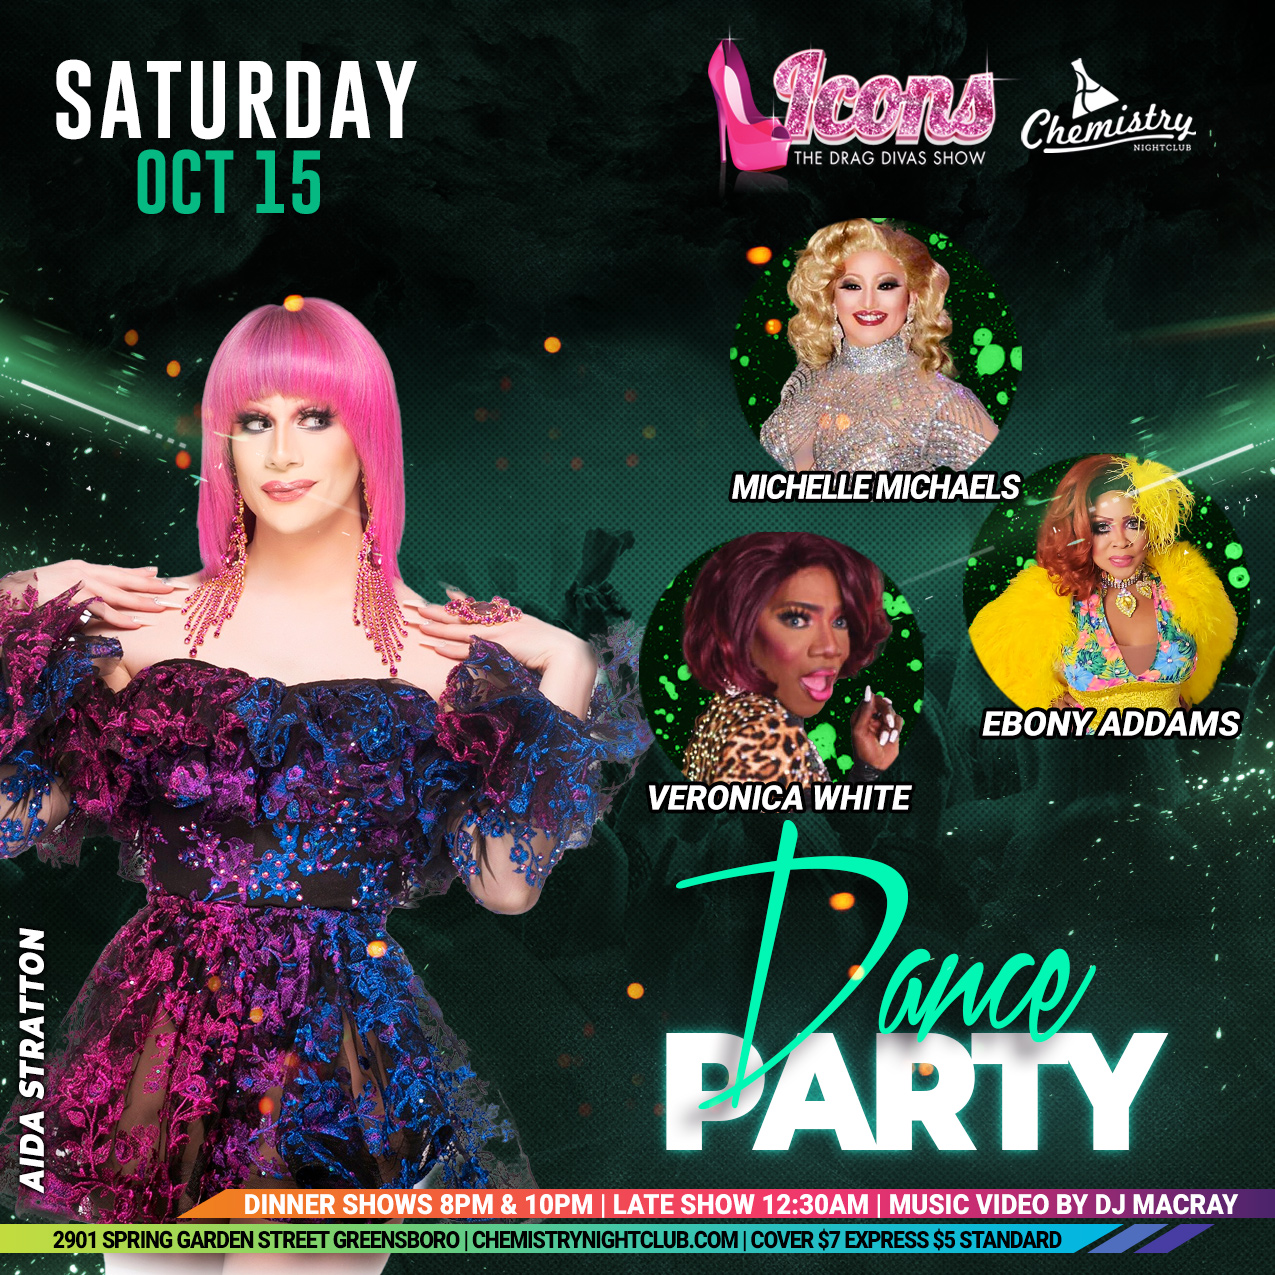 Saturday Dance Party Oct 15